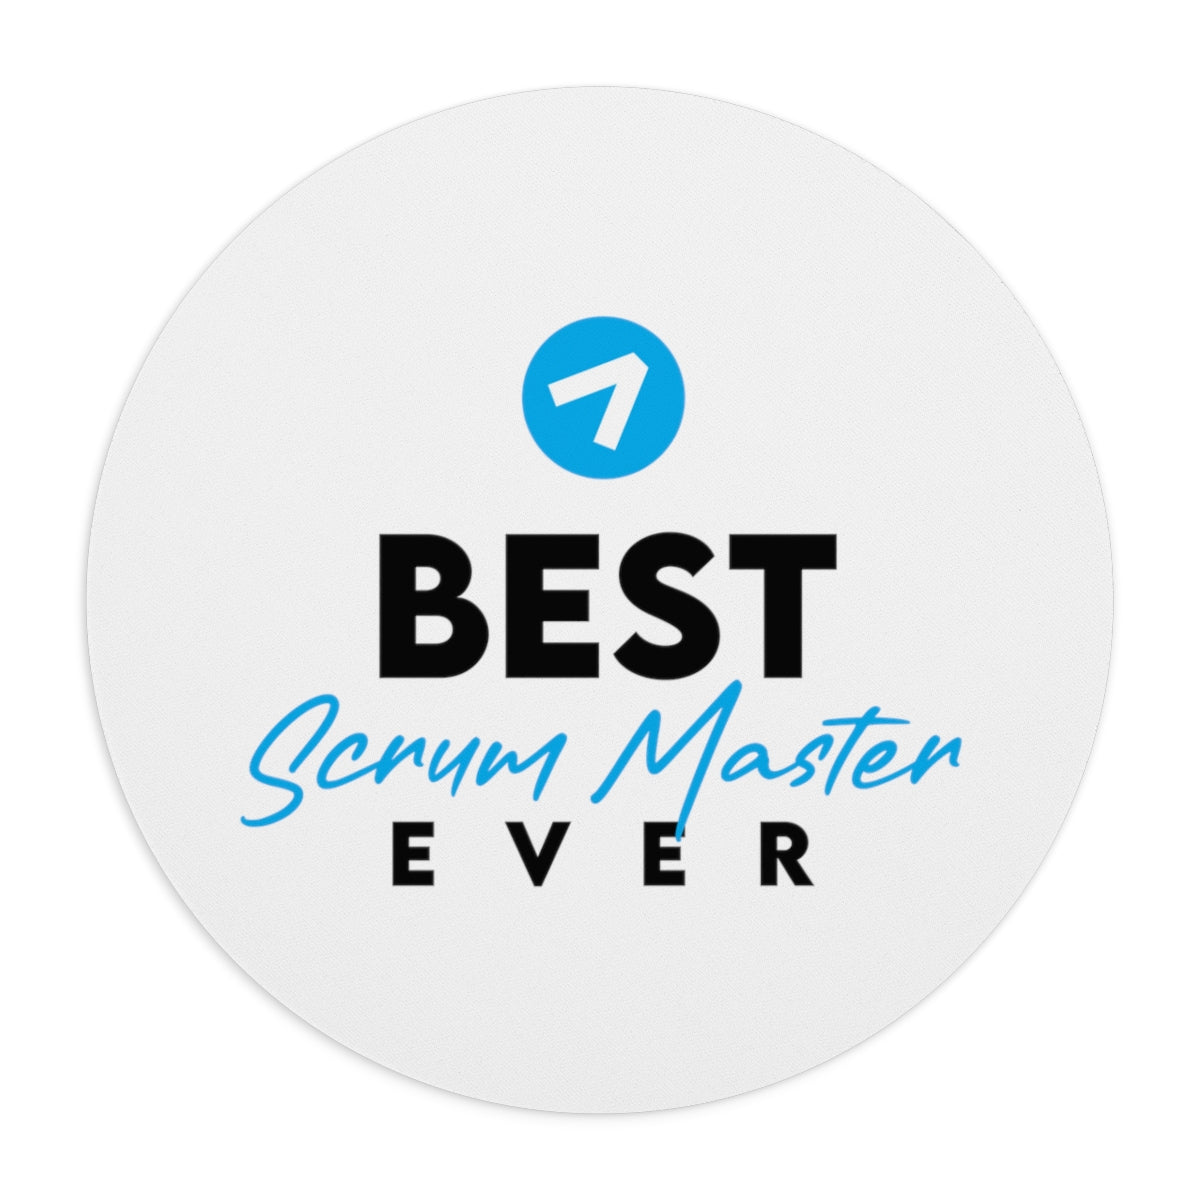 Best Scrum Master ever - Light Blue - Mouse Pad